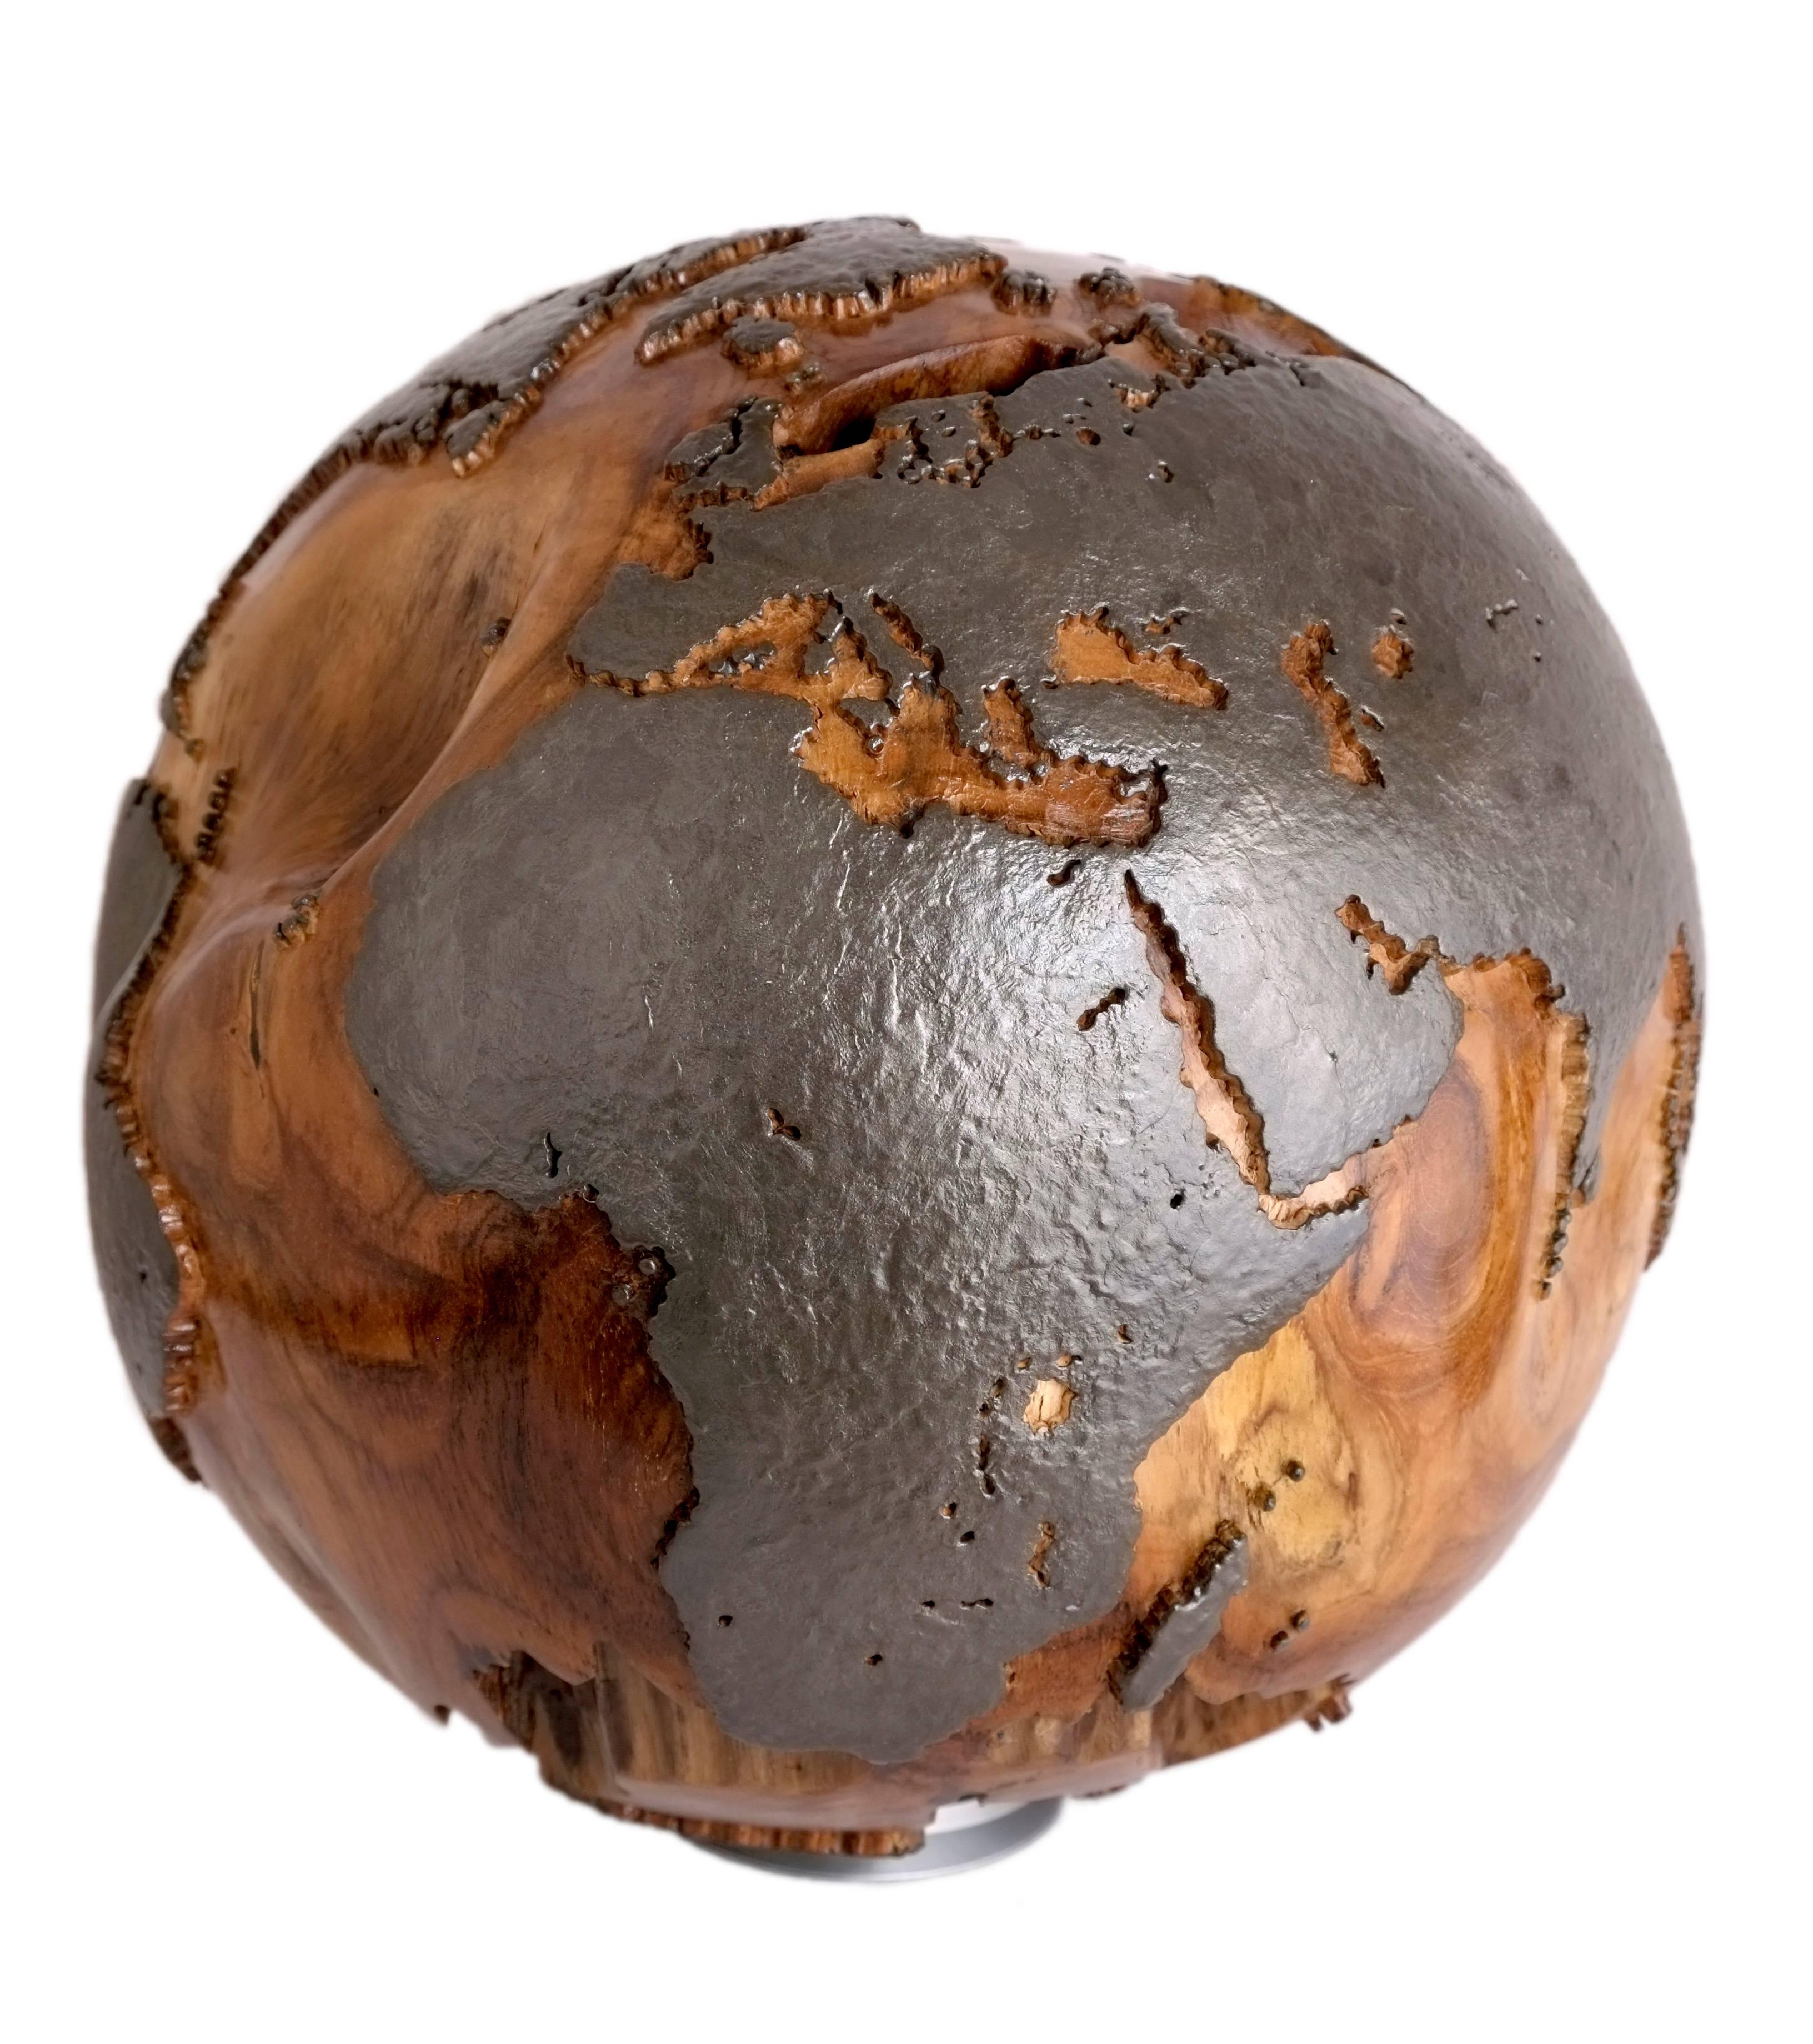 Hand-carved teak root globe with metal applique' finishing on the continent parts, this globe has some striking natural crevices and cracks on top and bottom. Absolutely impressive piece.

Dimension: 11.81 inches / 30 cm
Materials: Reclaimed teak